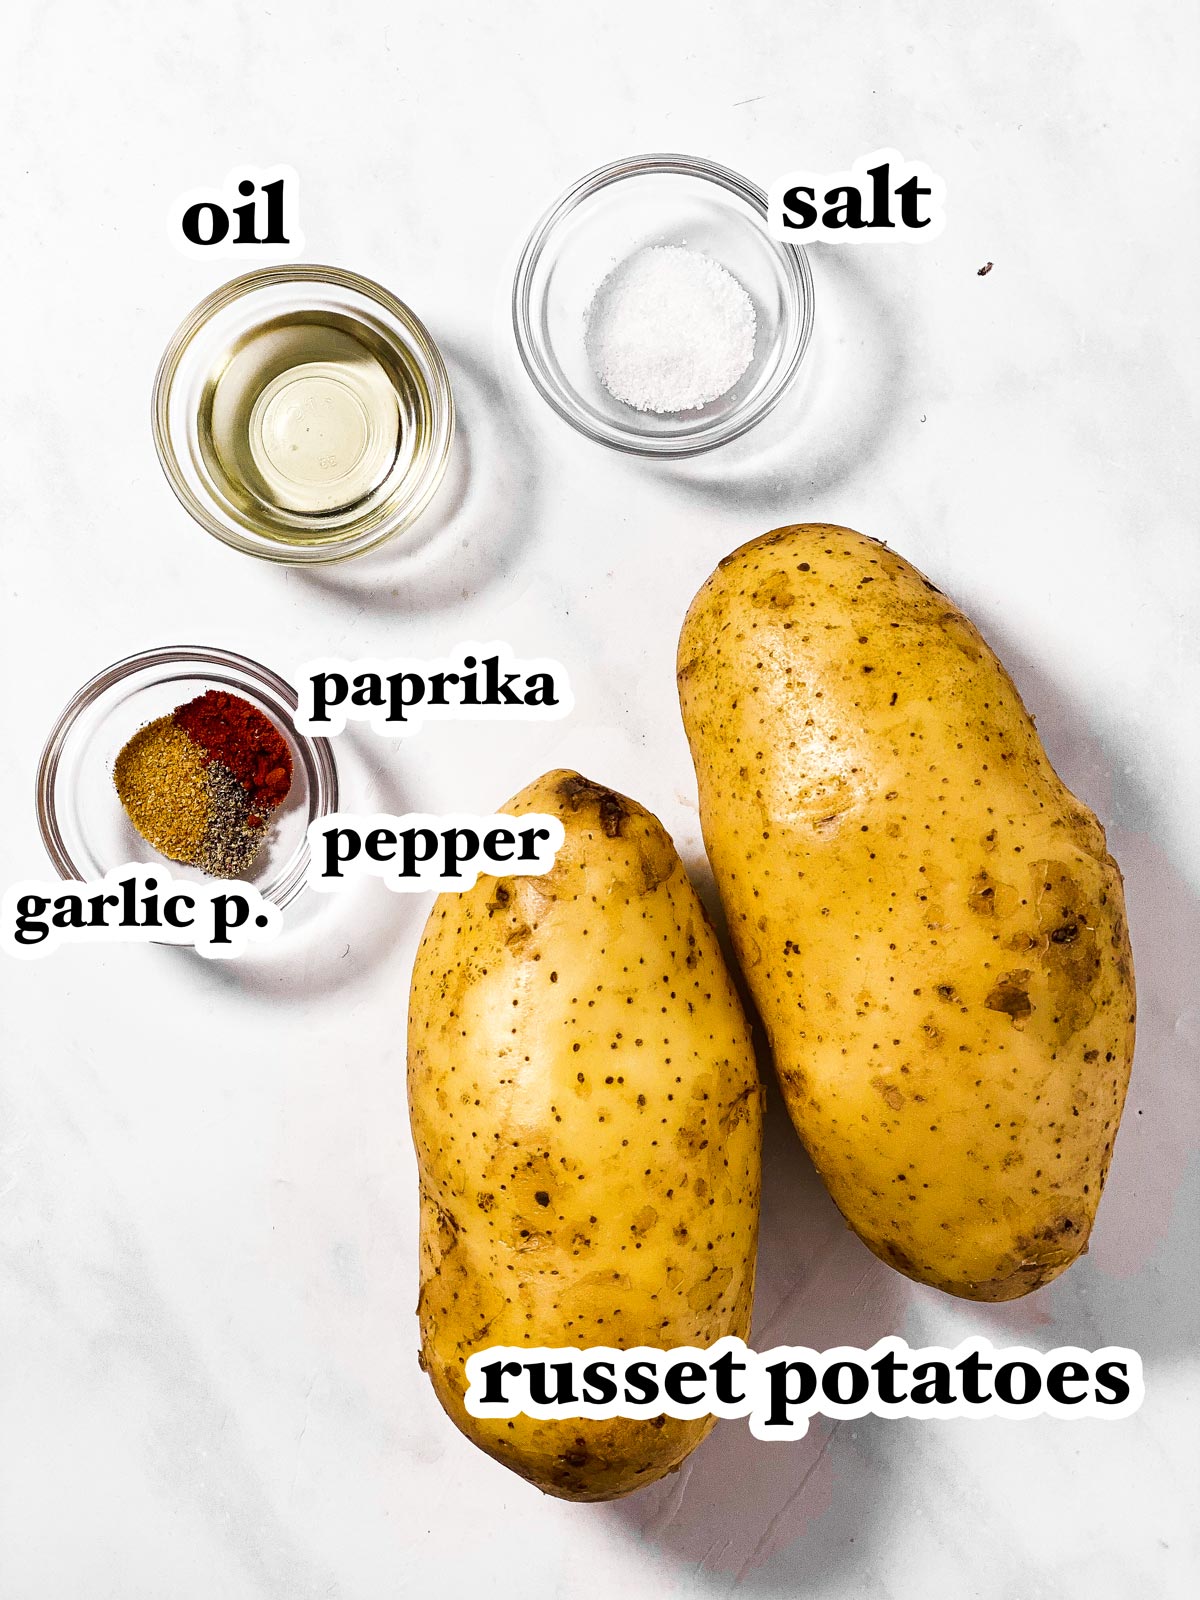 ingredients for air fryer french fries with text labels